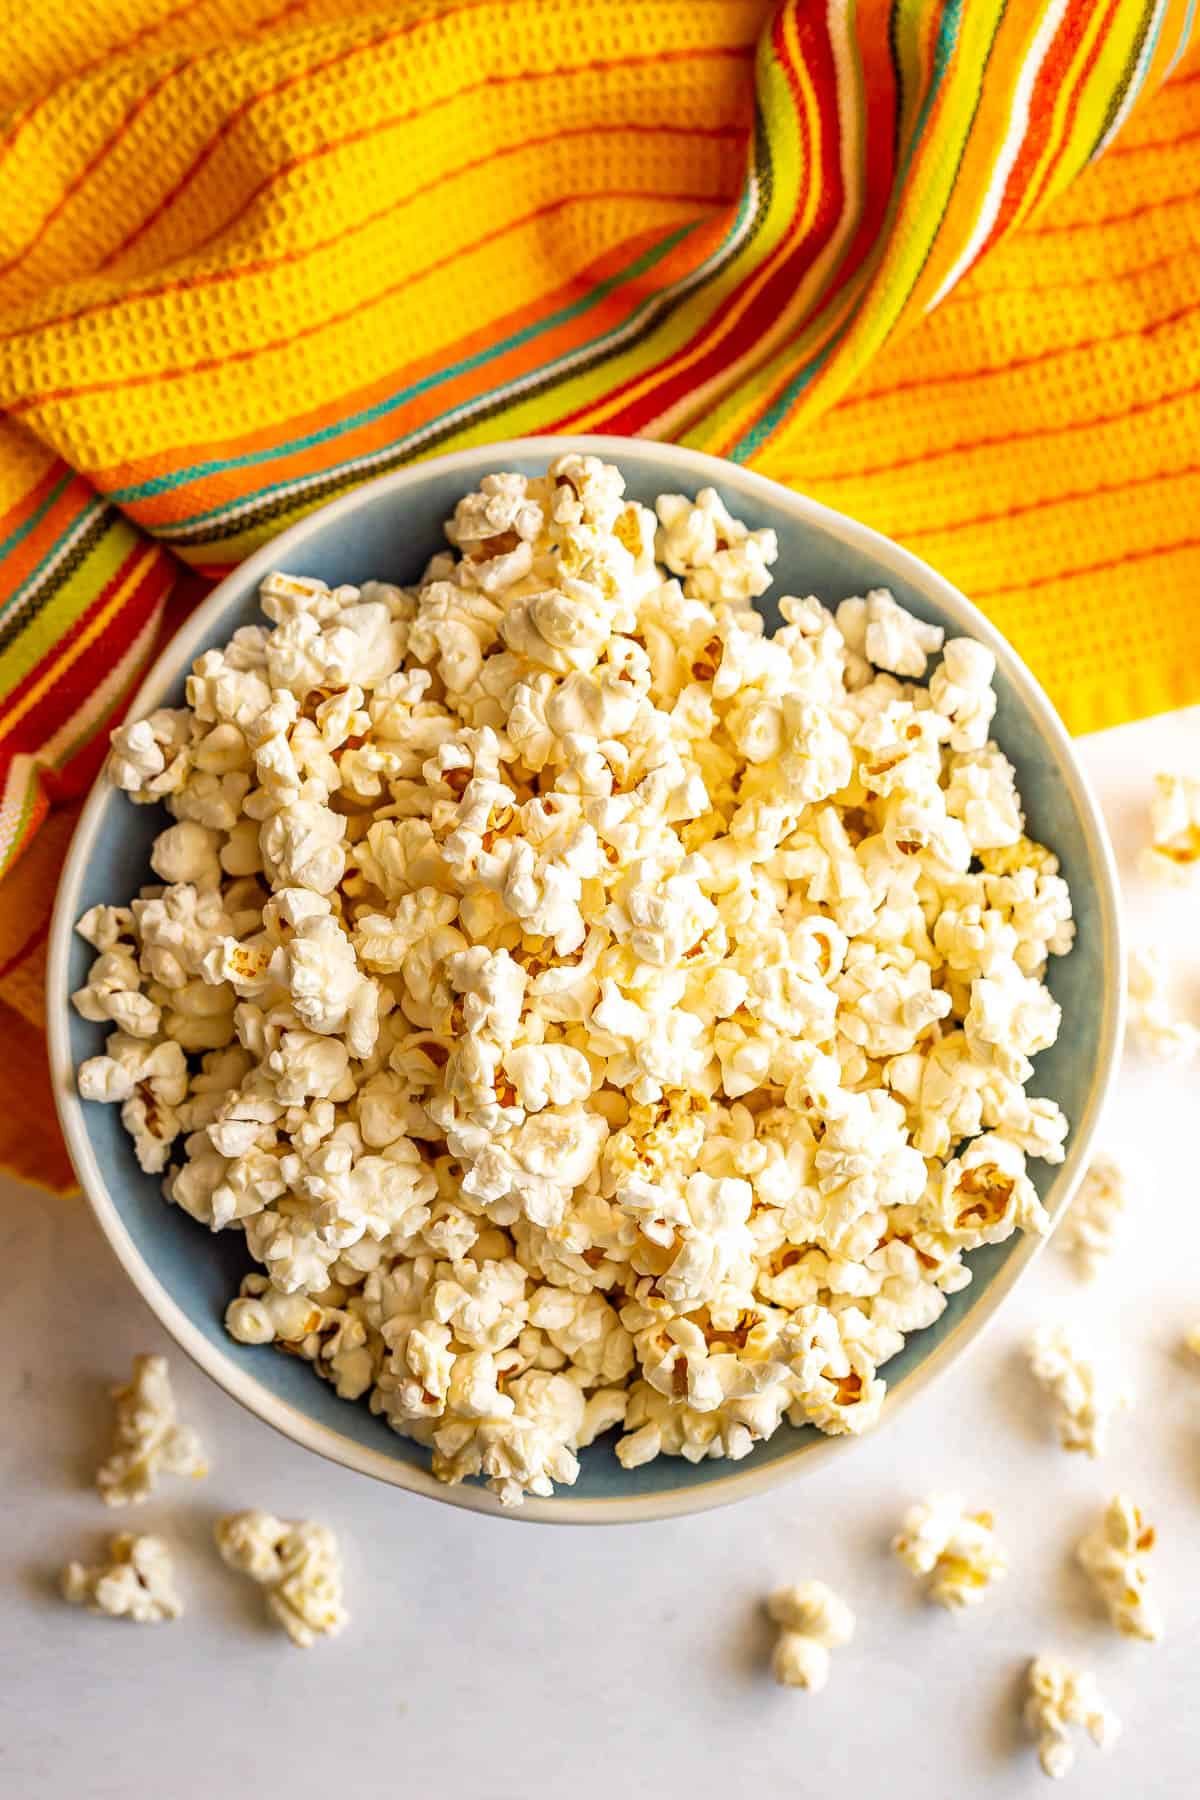 A blue and white bowl filled with popcorn with kernels spilling over onto the counter.